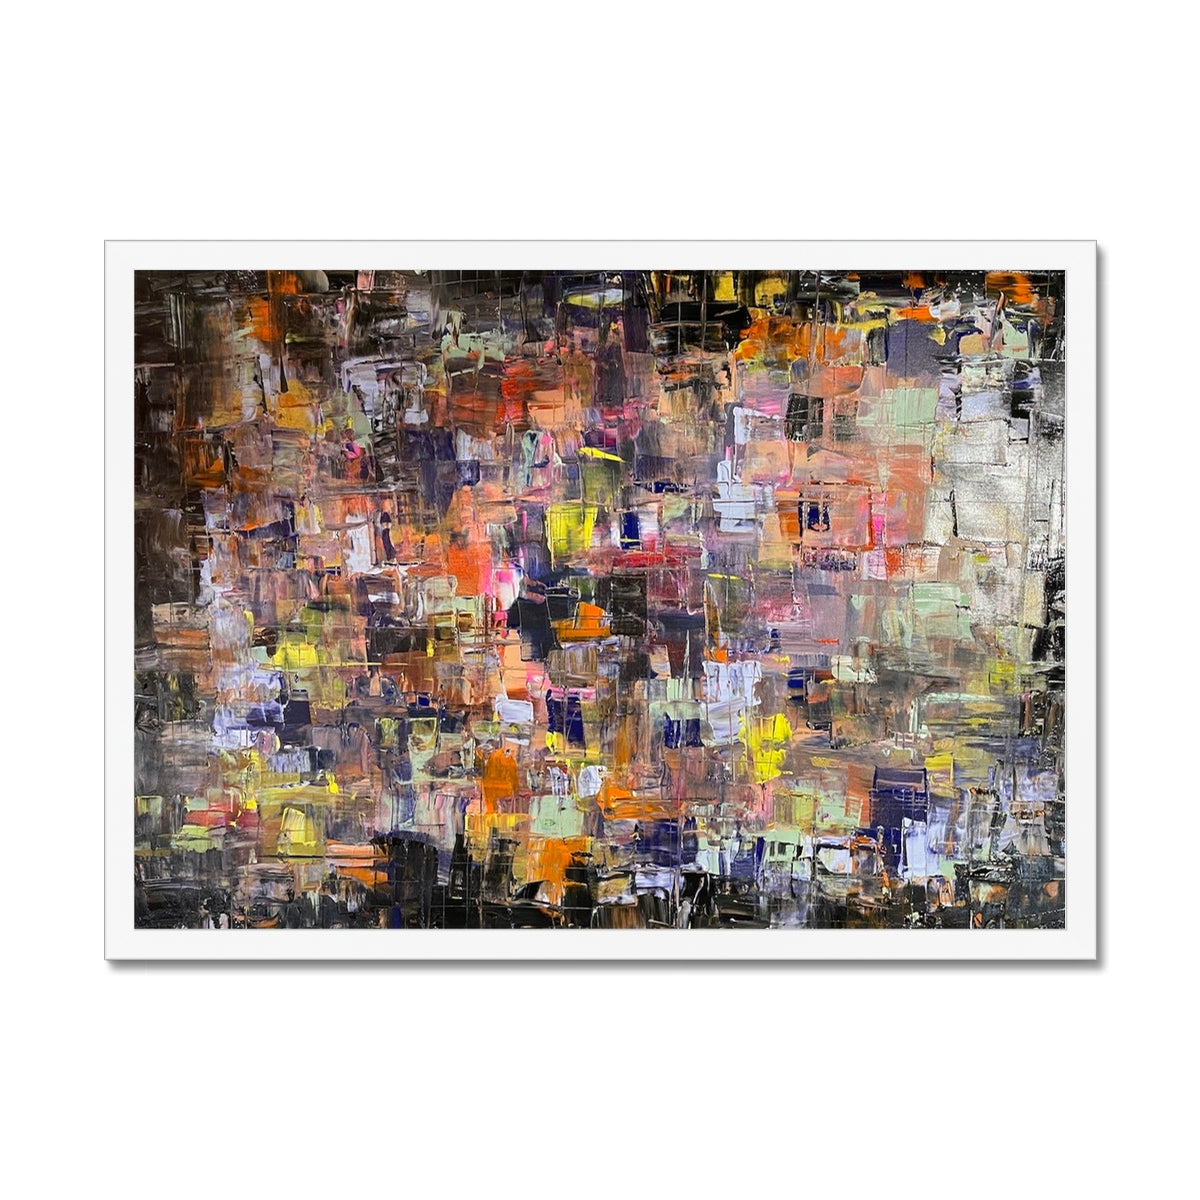 Never Enough Abstract Painting | Framed Prints From Scotland-Framed Prints-Abstract & Impressionistic Art Gallery-A2 Landscape-White Frame-Paintings, Prints, Homeware, Art Gifts From Scotland By Scottish Artist Kevin Hunter